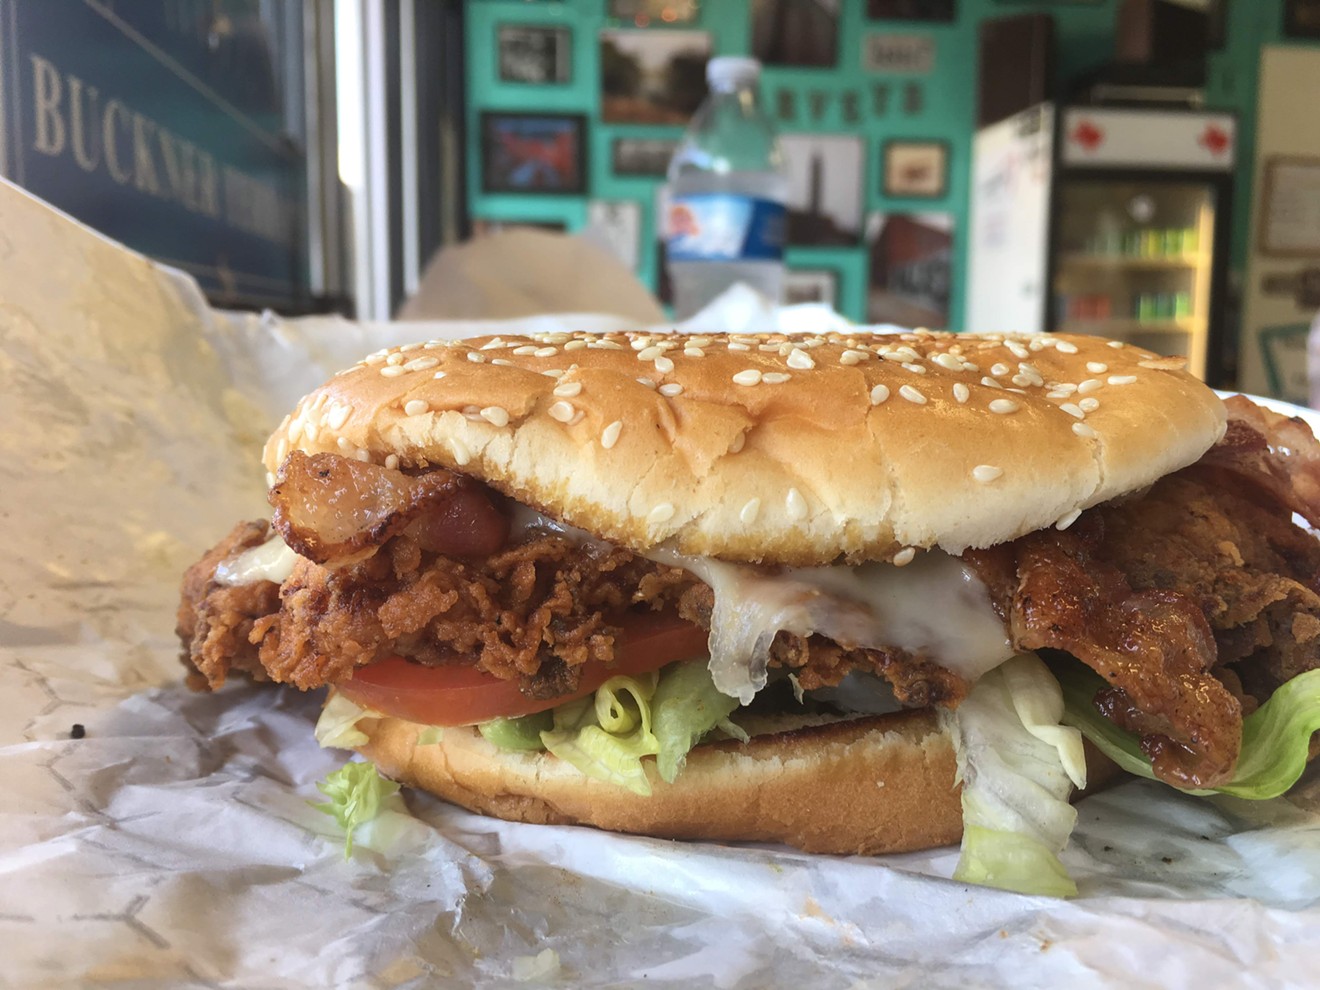 A fried chicken sandwich on a smashed sesame bun at Harvey B's, with Swiss cheese and bacon for less than $6.